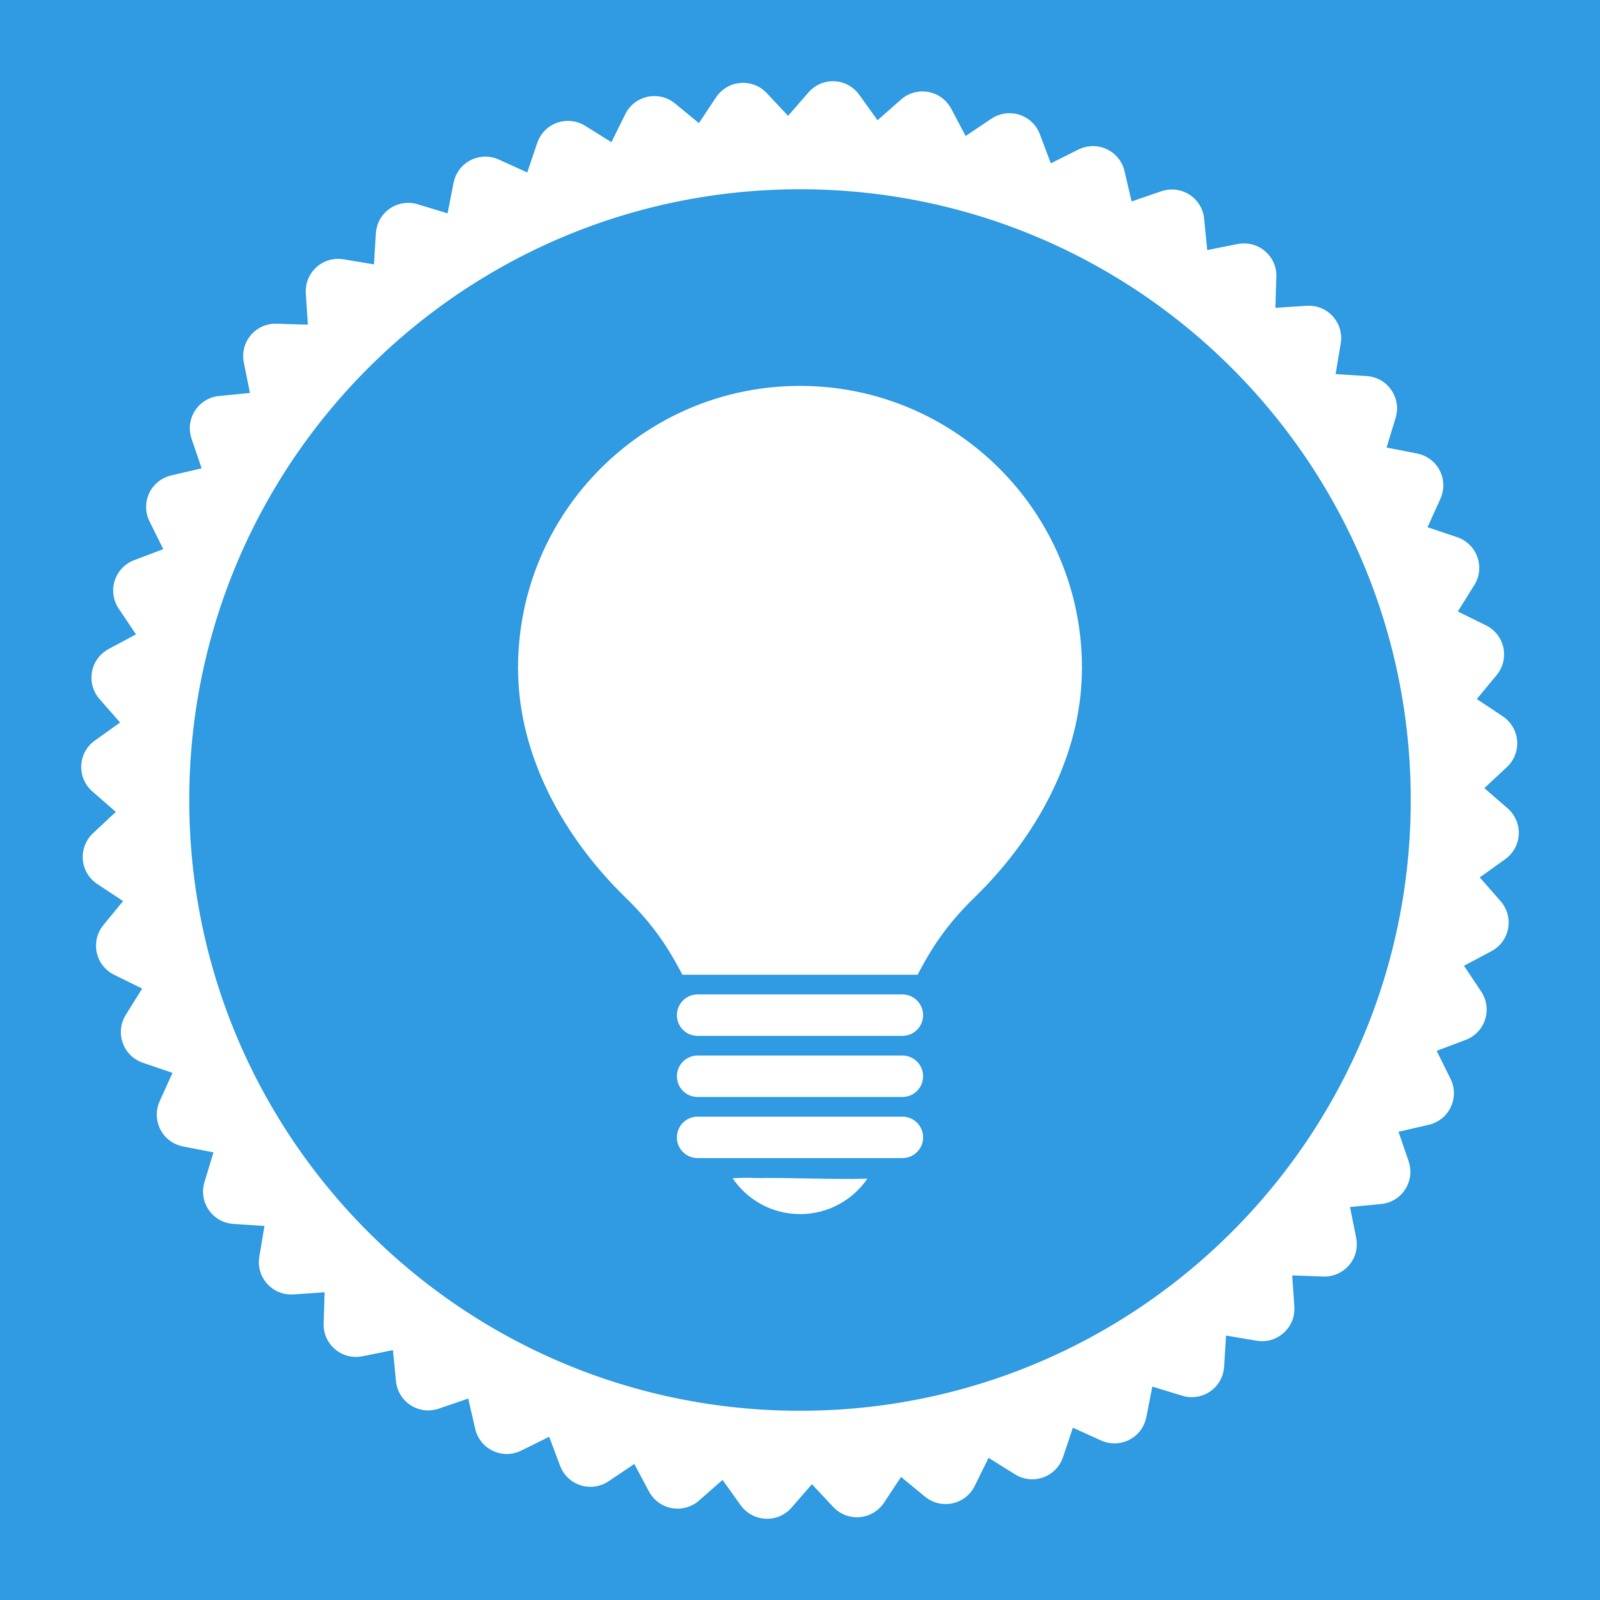 Electric Bulb round stamp icon. This flat vector symbol is drawn with white color on a blue background.